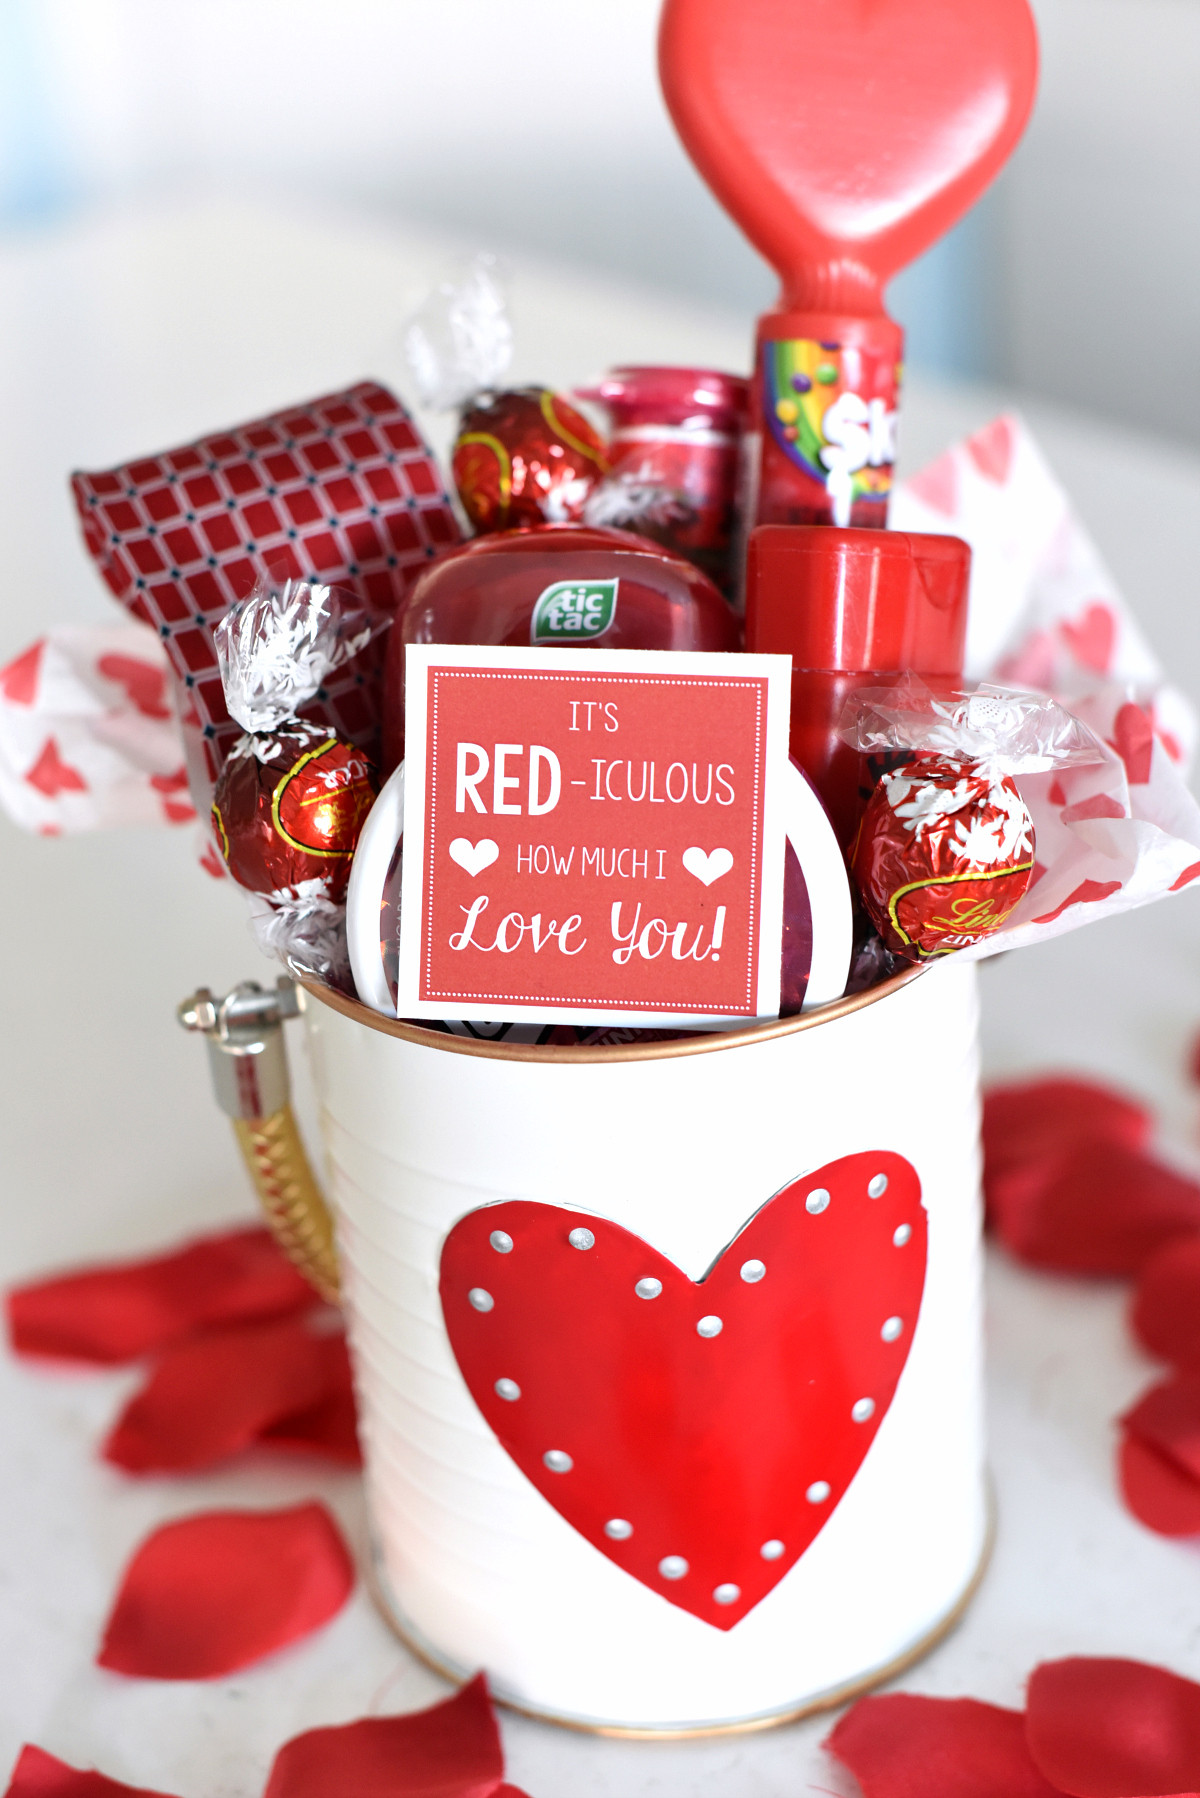 Valentines Gift Ideas For Husband
 Cute Valentine s Day Gift Idea RED iculous Basket